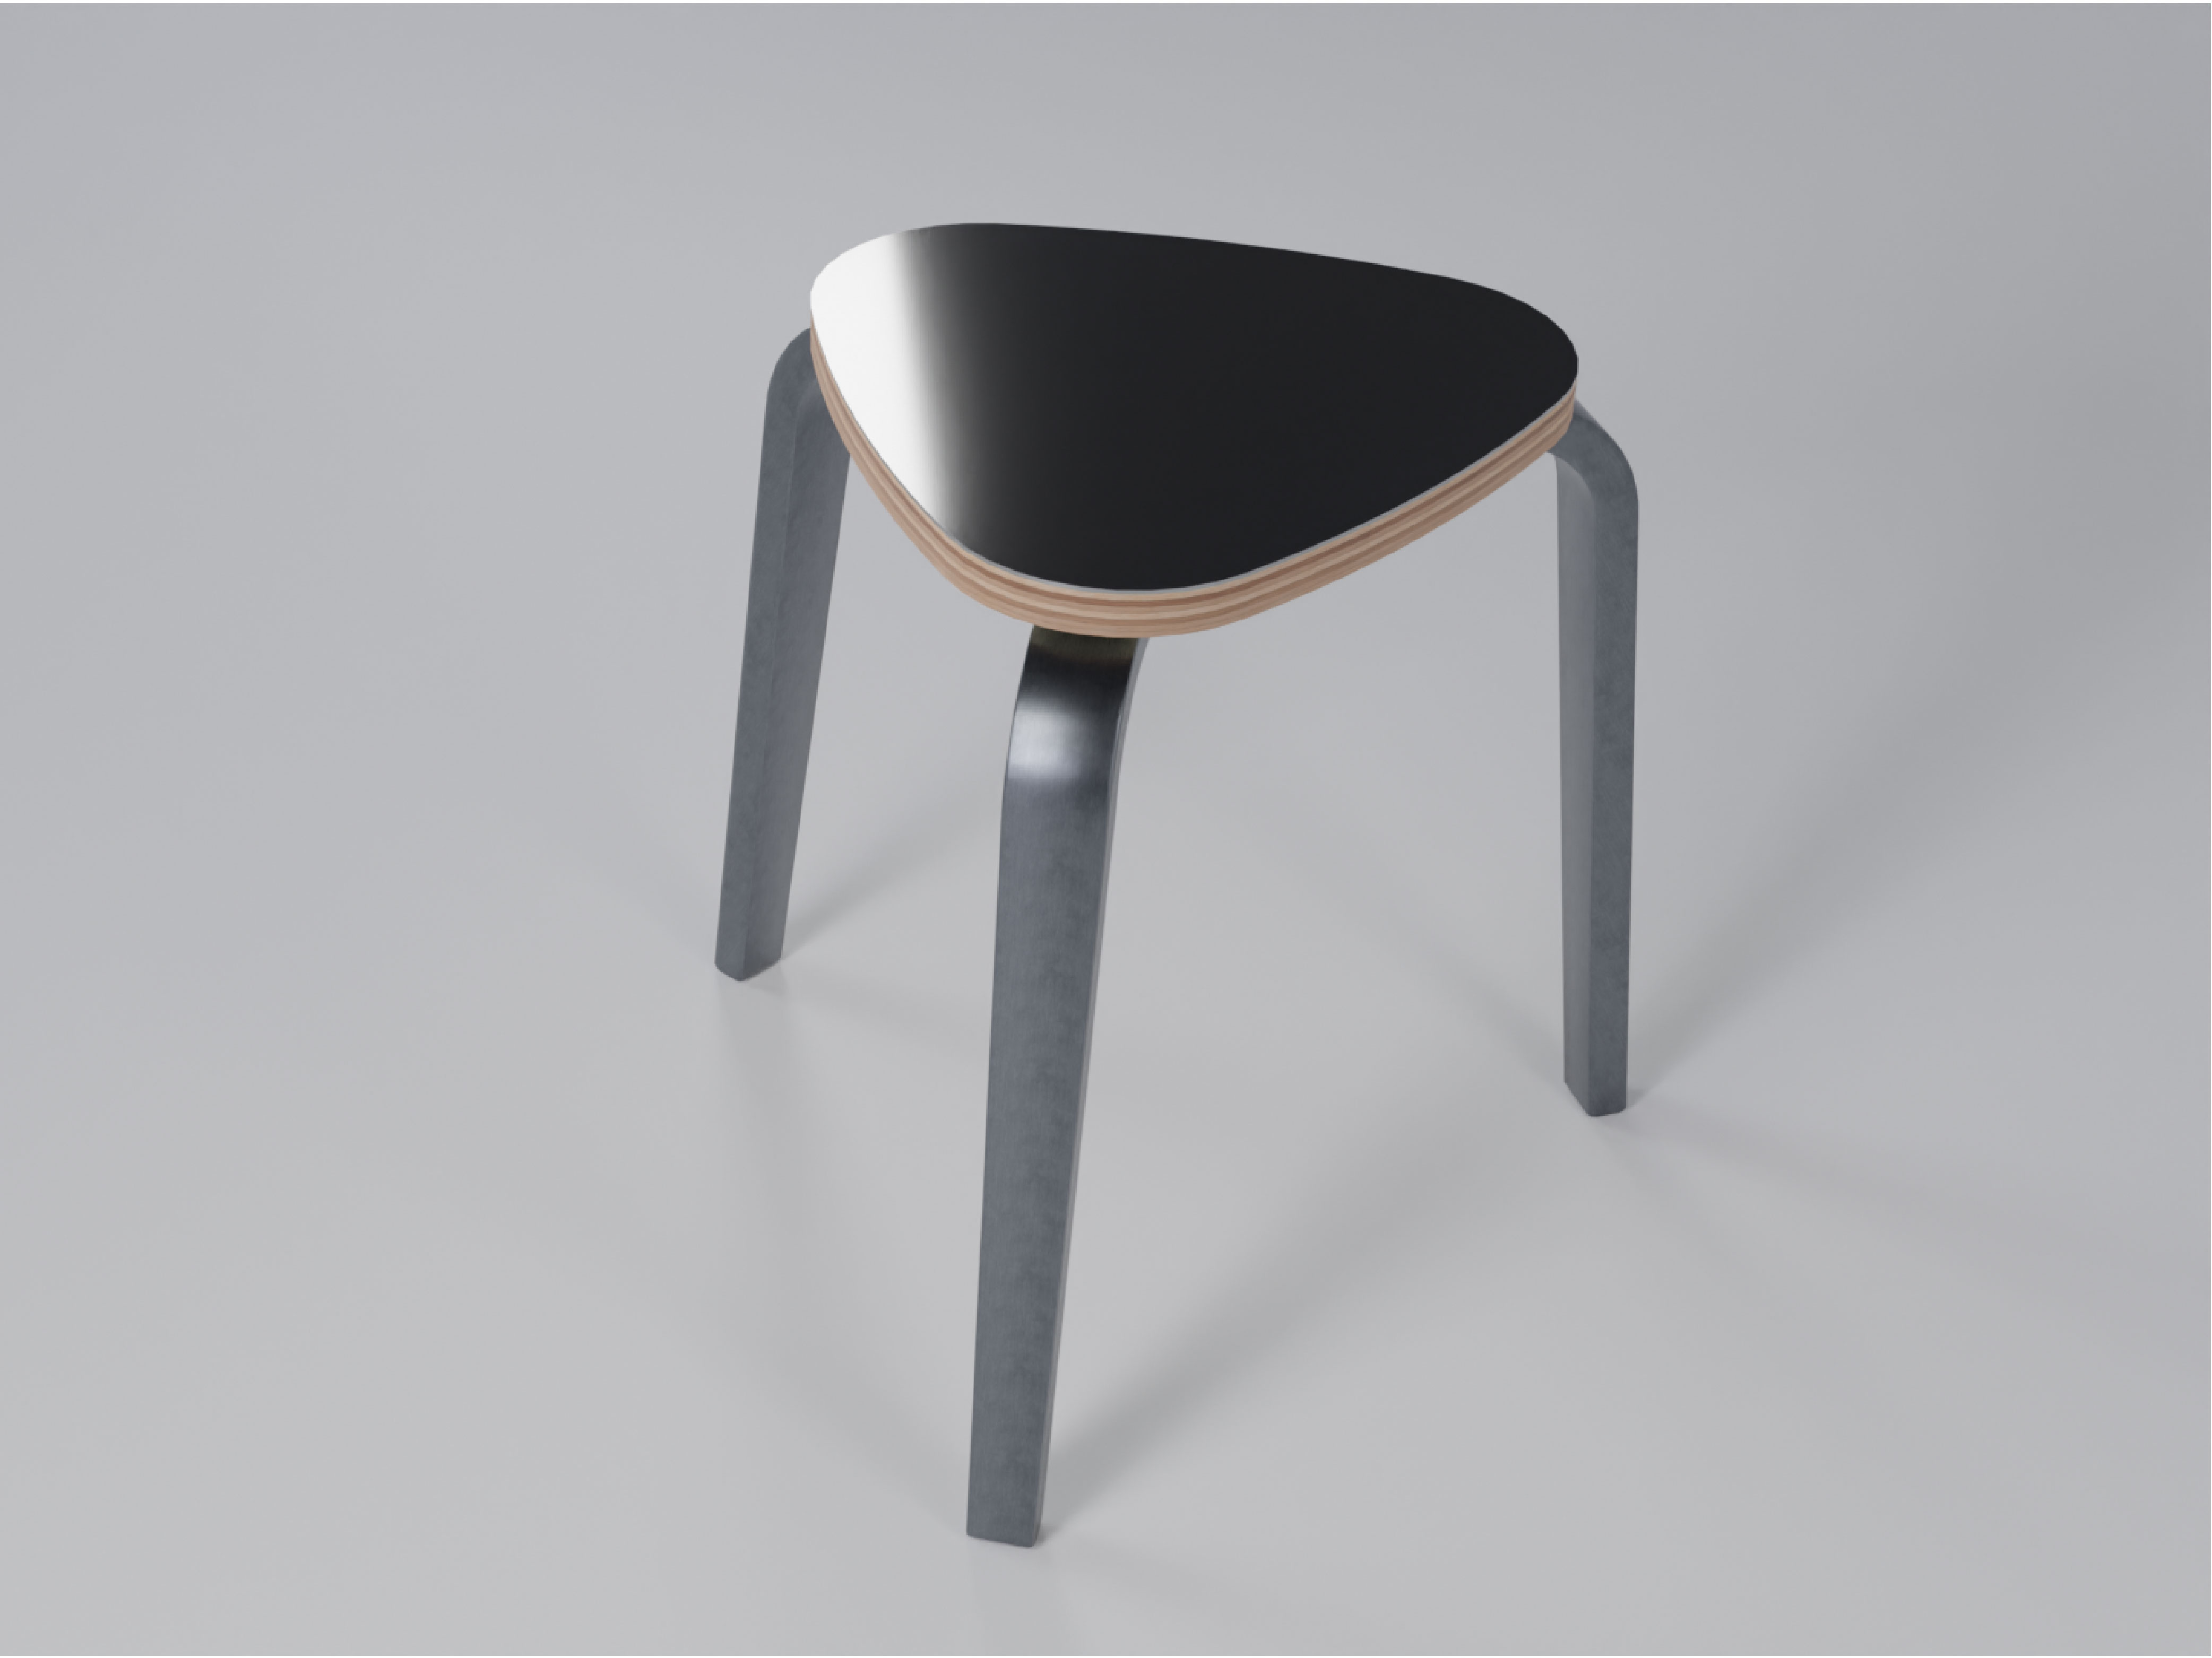 Stool with new materials